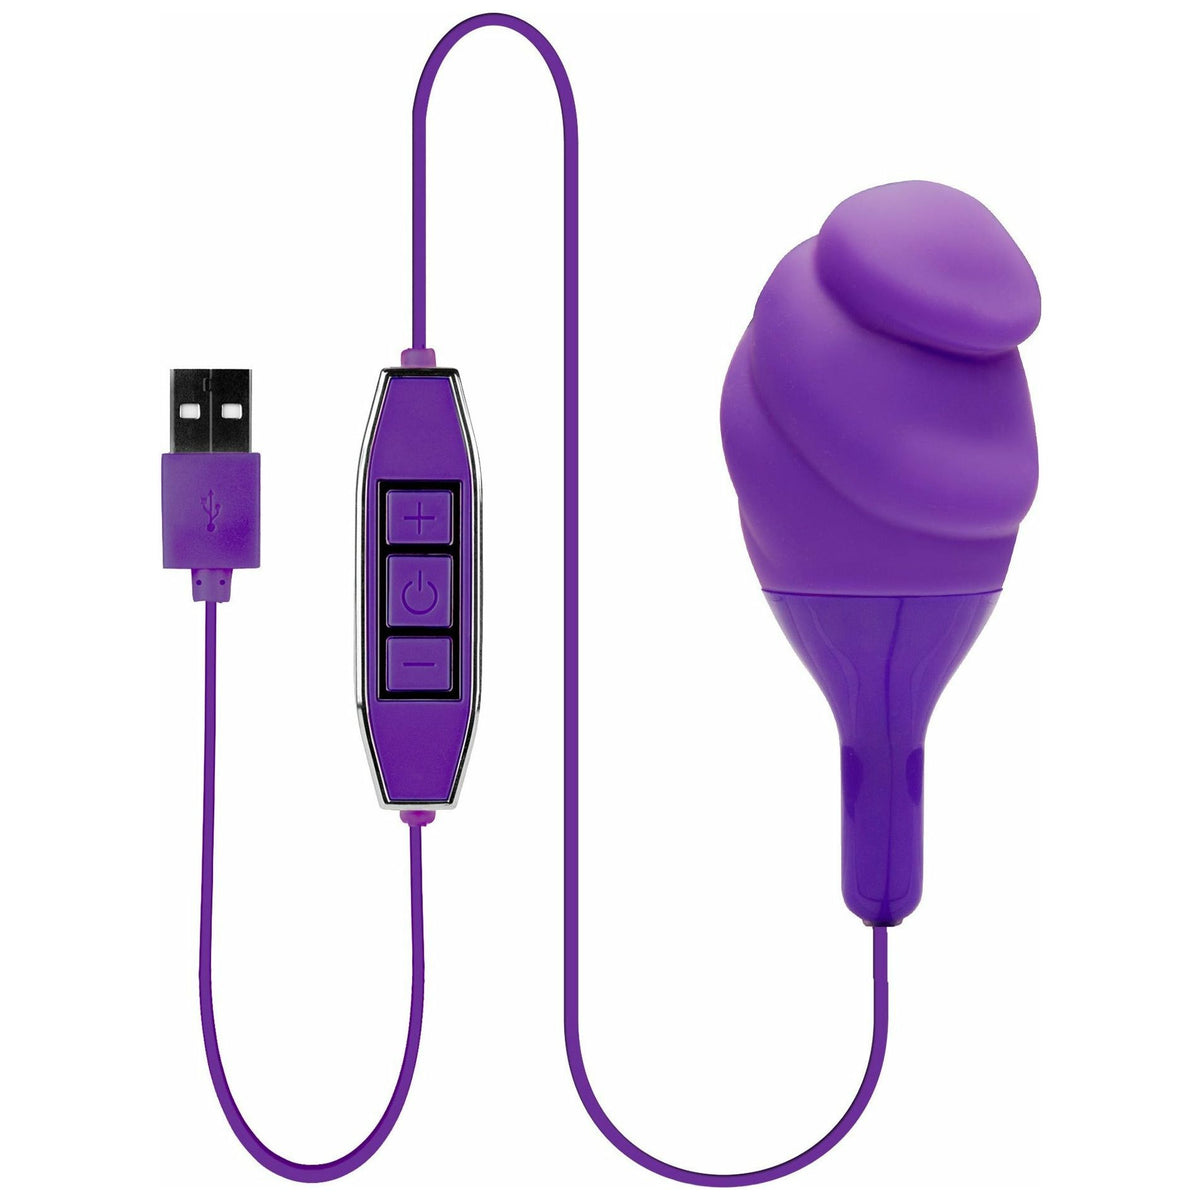 NMC Hands On - Textured Vibrator - Rechargeable - Purple